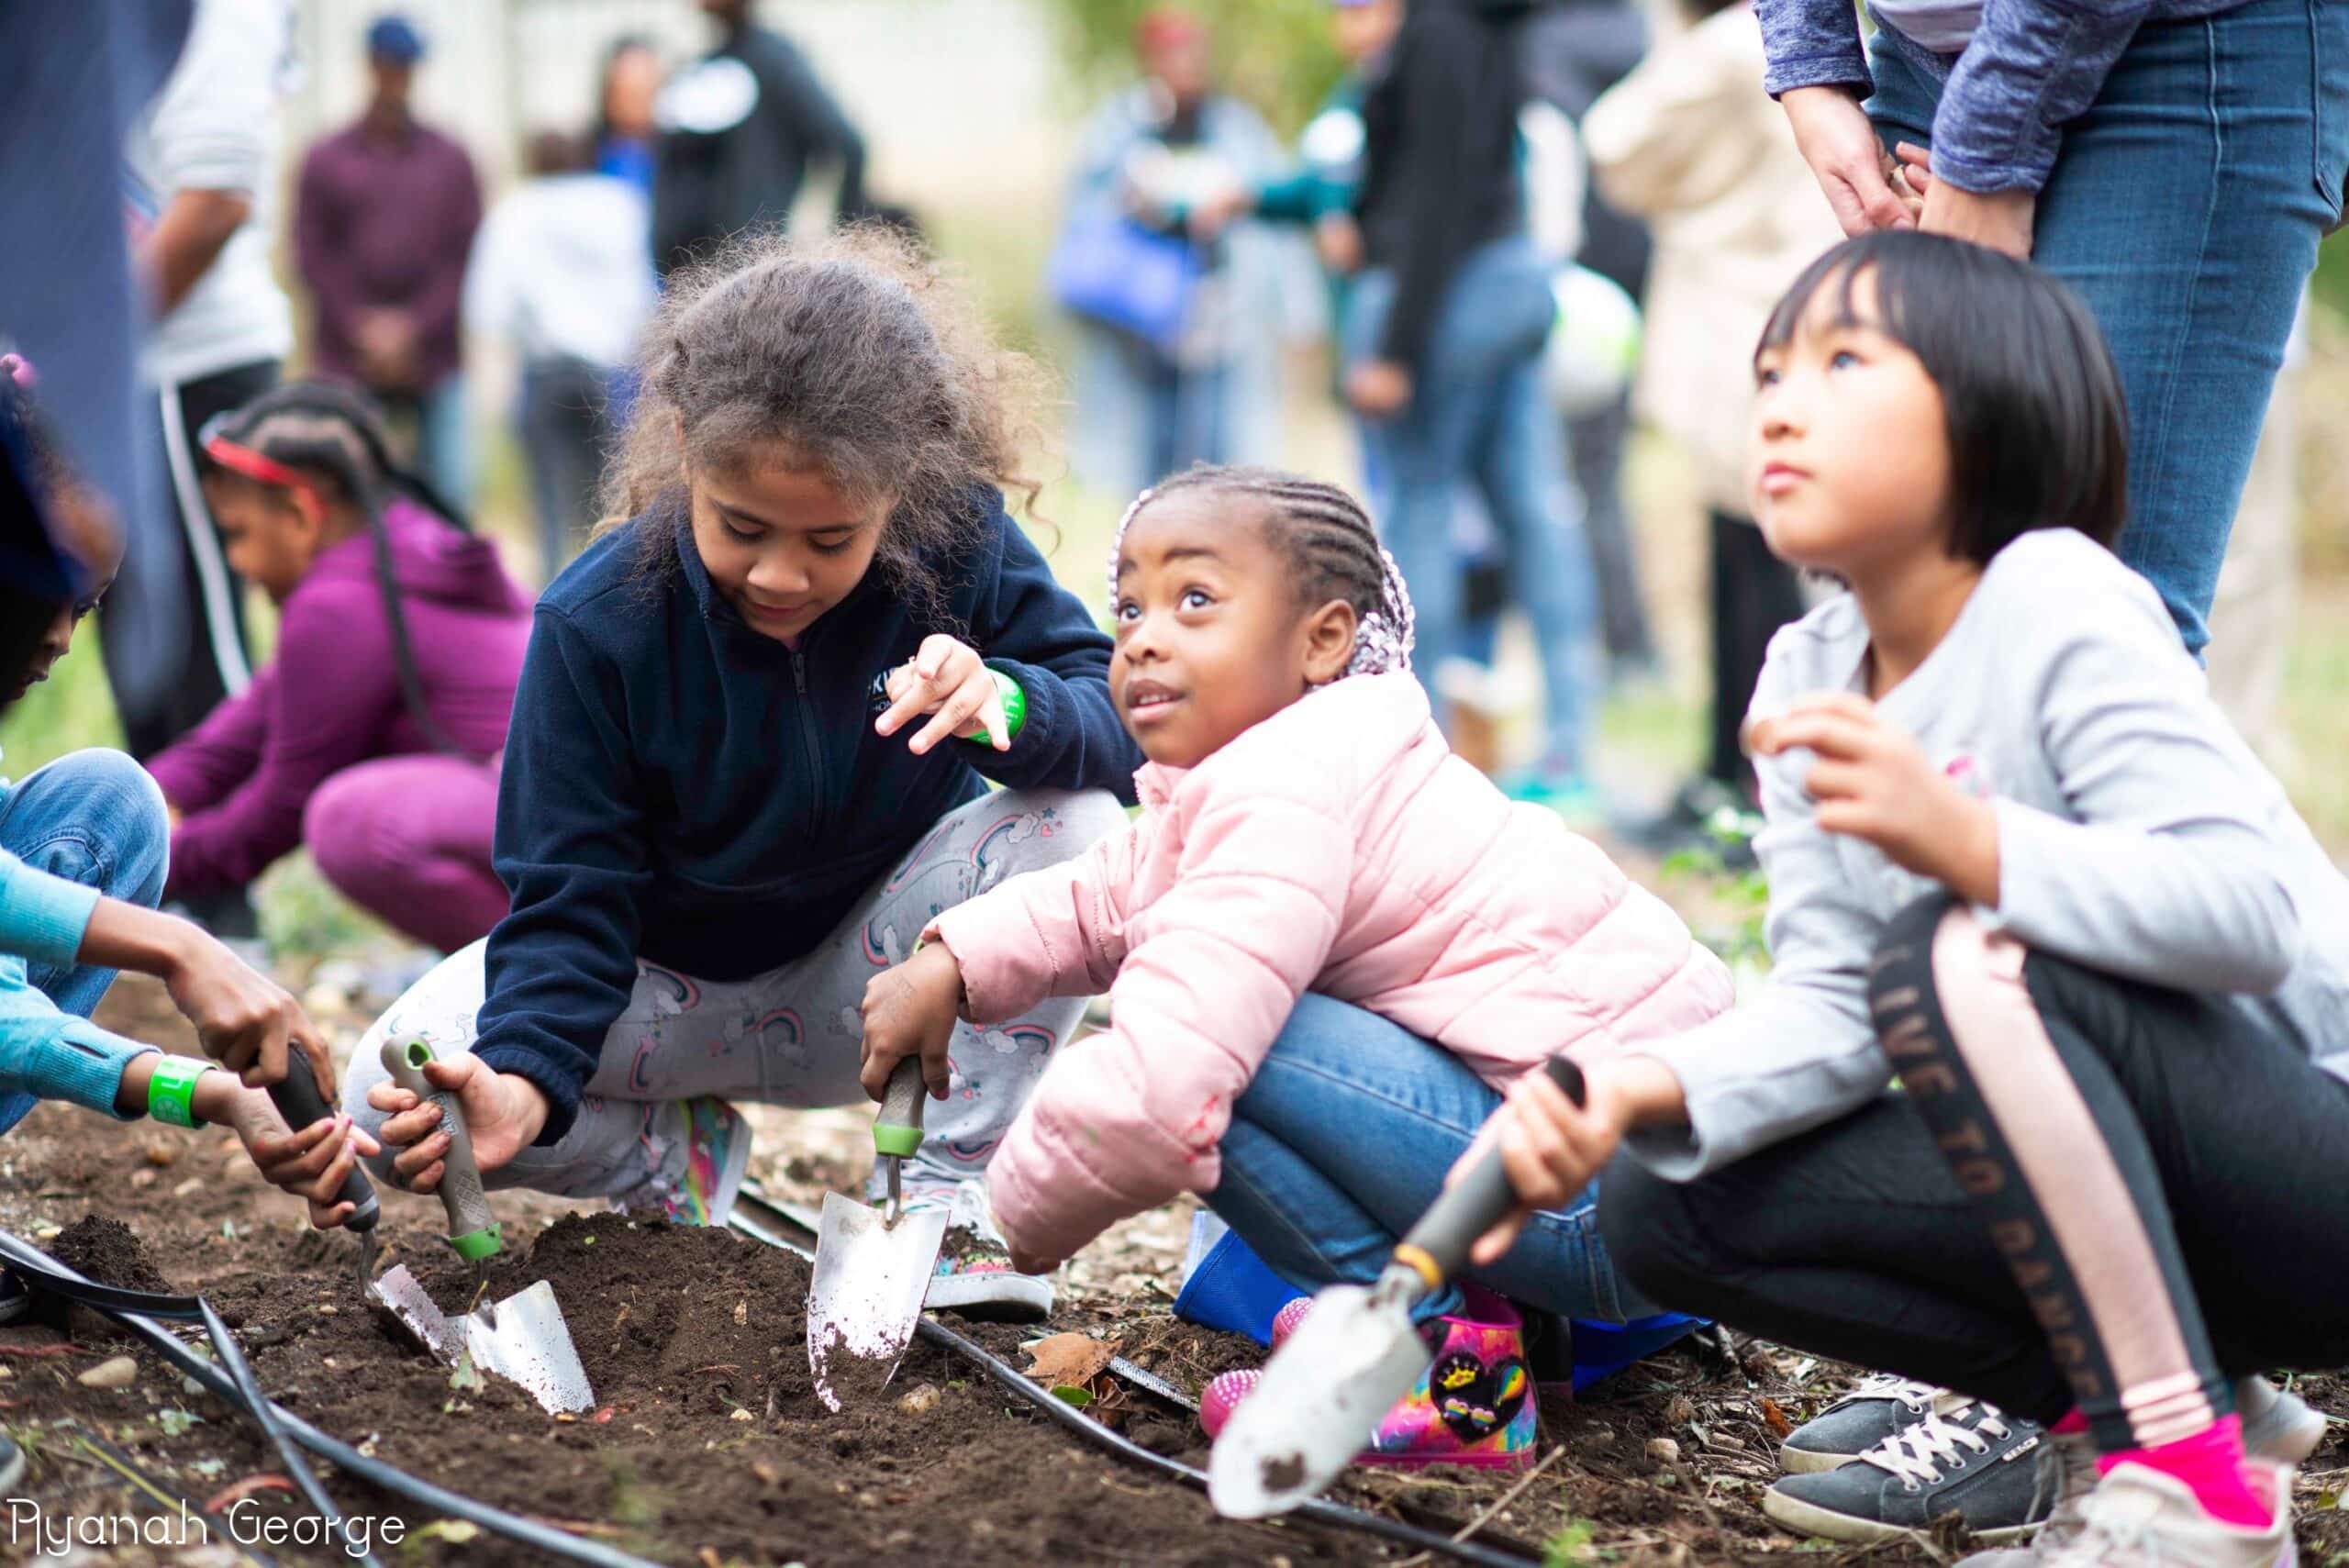 A group of children planting a tree in the dirt at Building Bridges Farm, a community-driven garden for healthy food access.